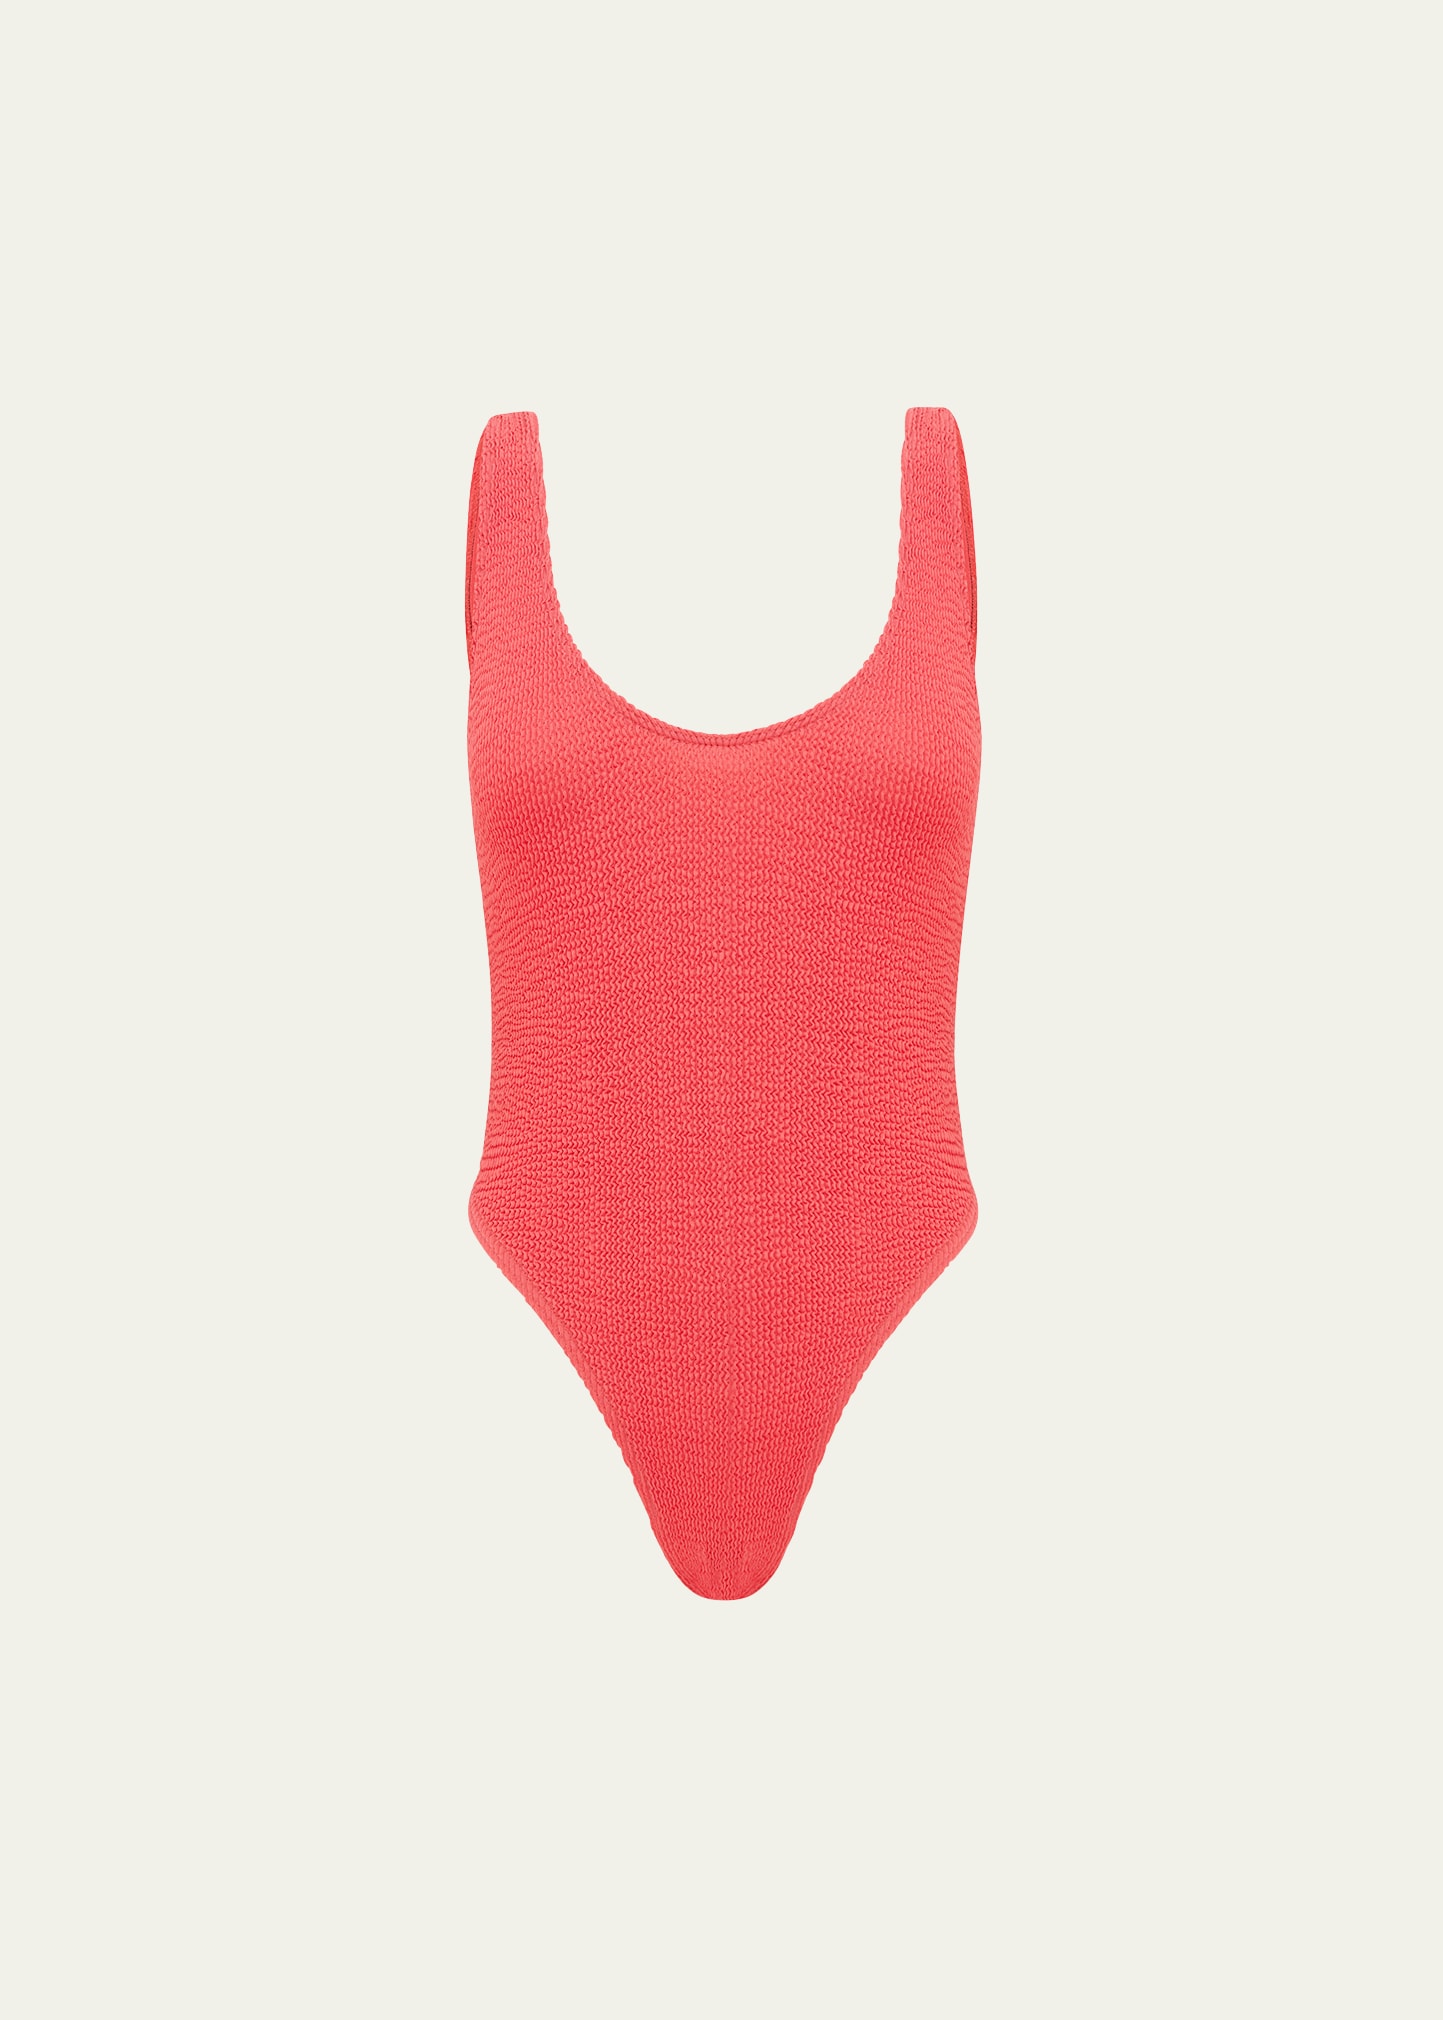 Alicia Ring One-Piece Swimsuit